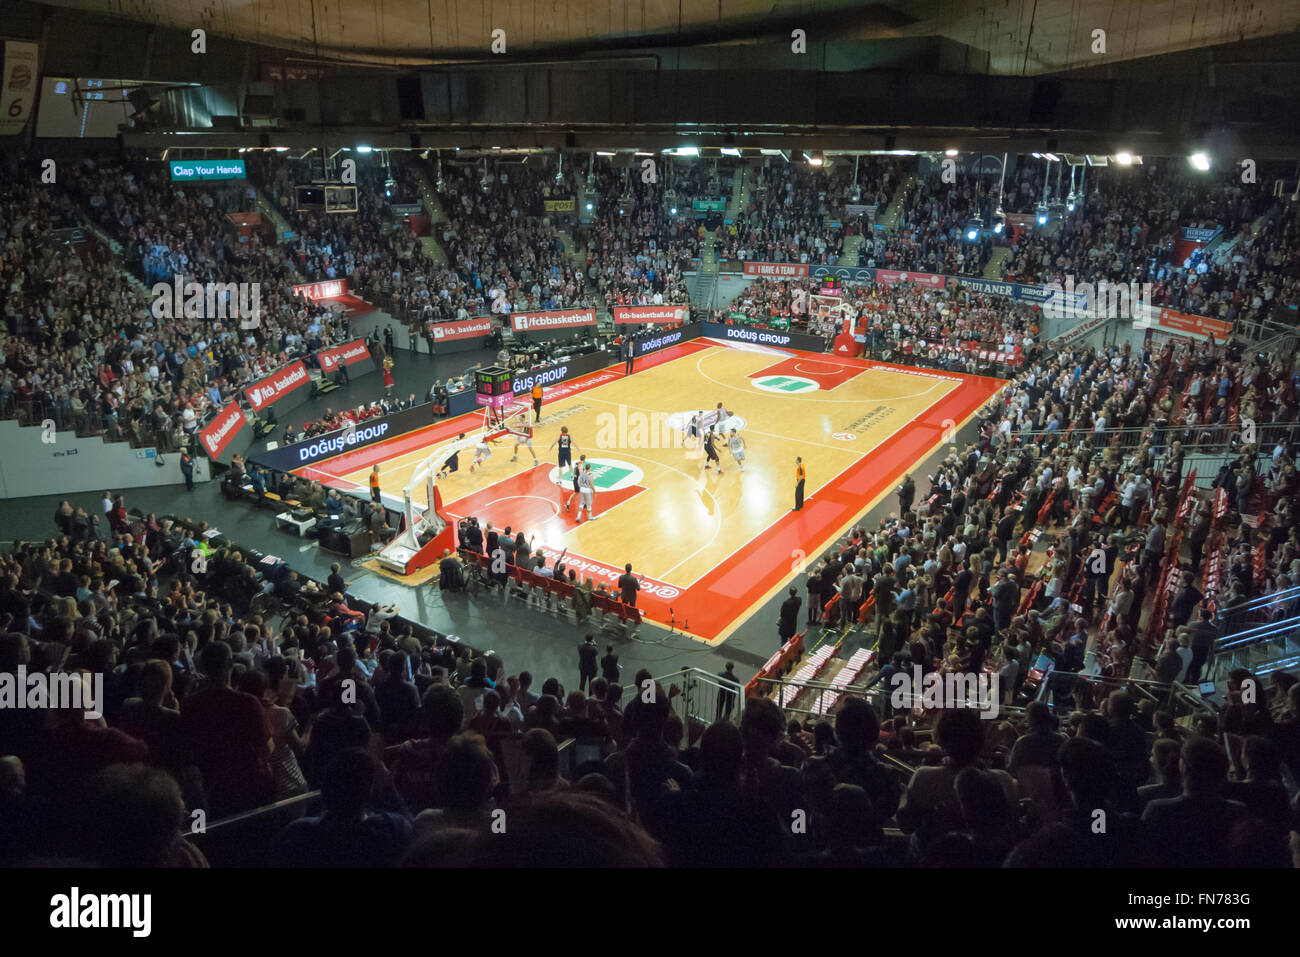 FC Bayern München Basketball team playing Straßburg IG at an Euro League match at the Audi Dome in Munich Stock Photo